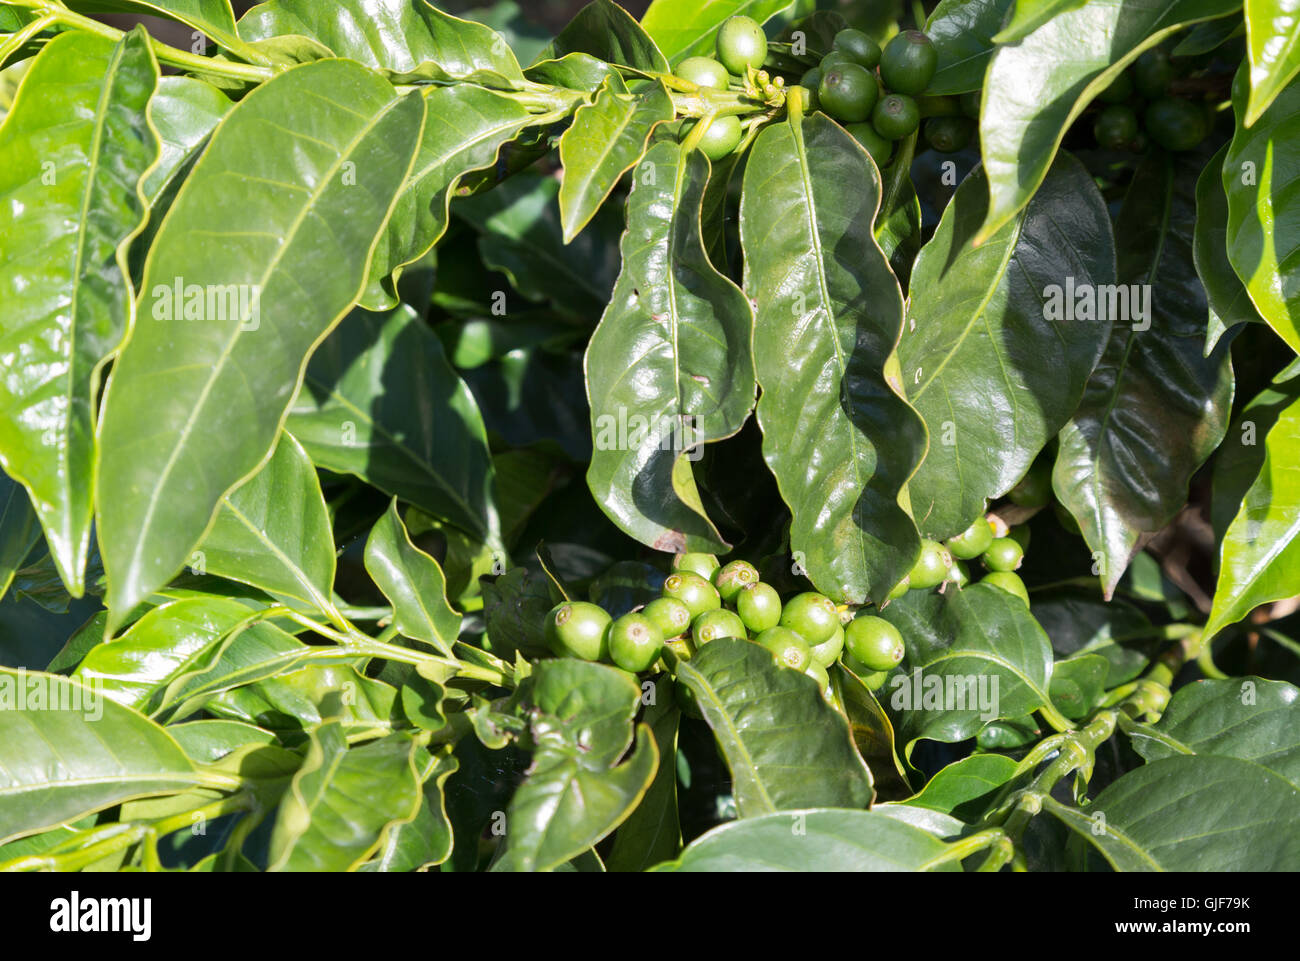 Coffee beans growing in a coffee plantation, Poas, Costa Rica, Central America Stock Photo